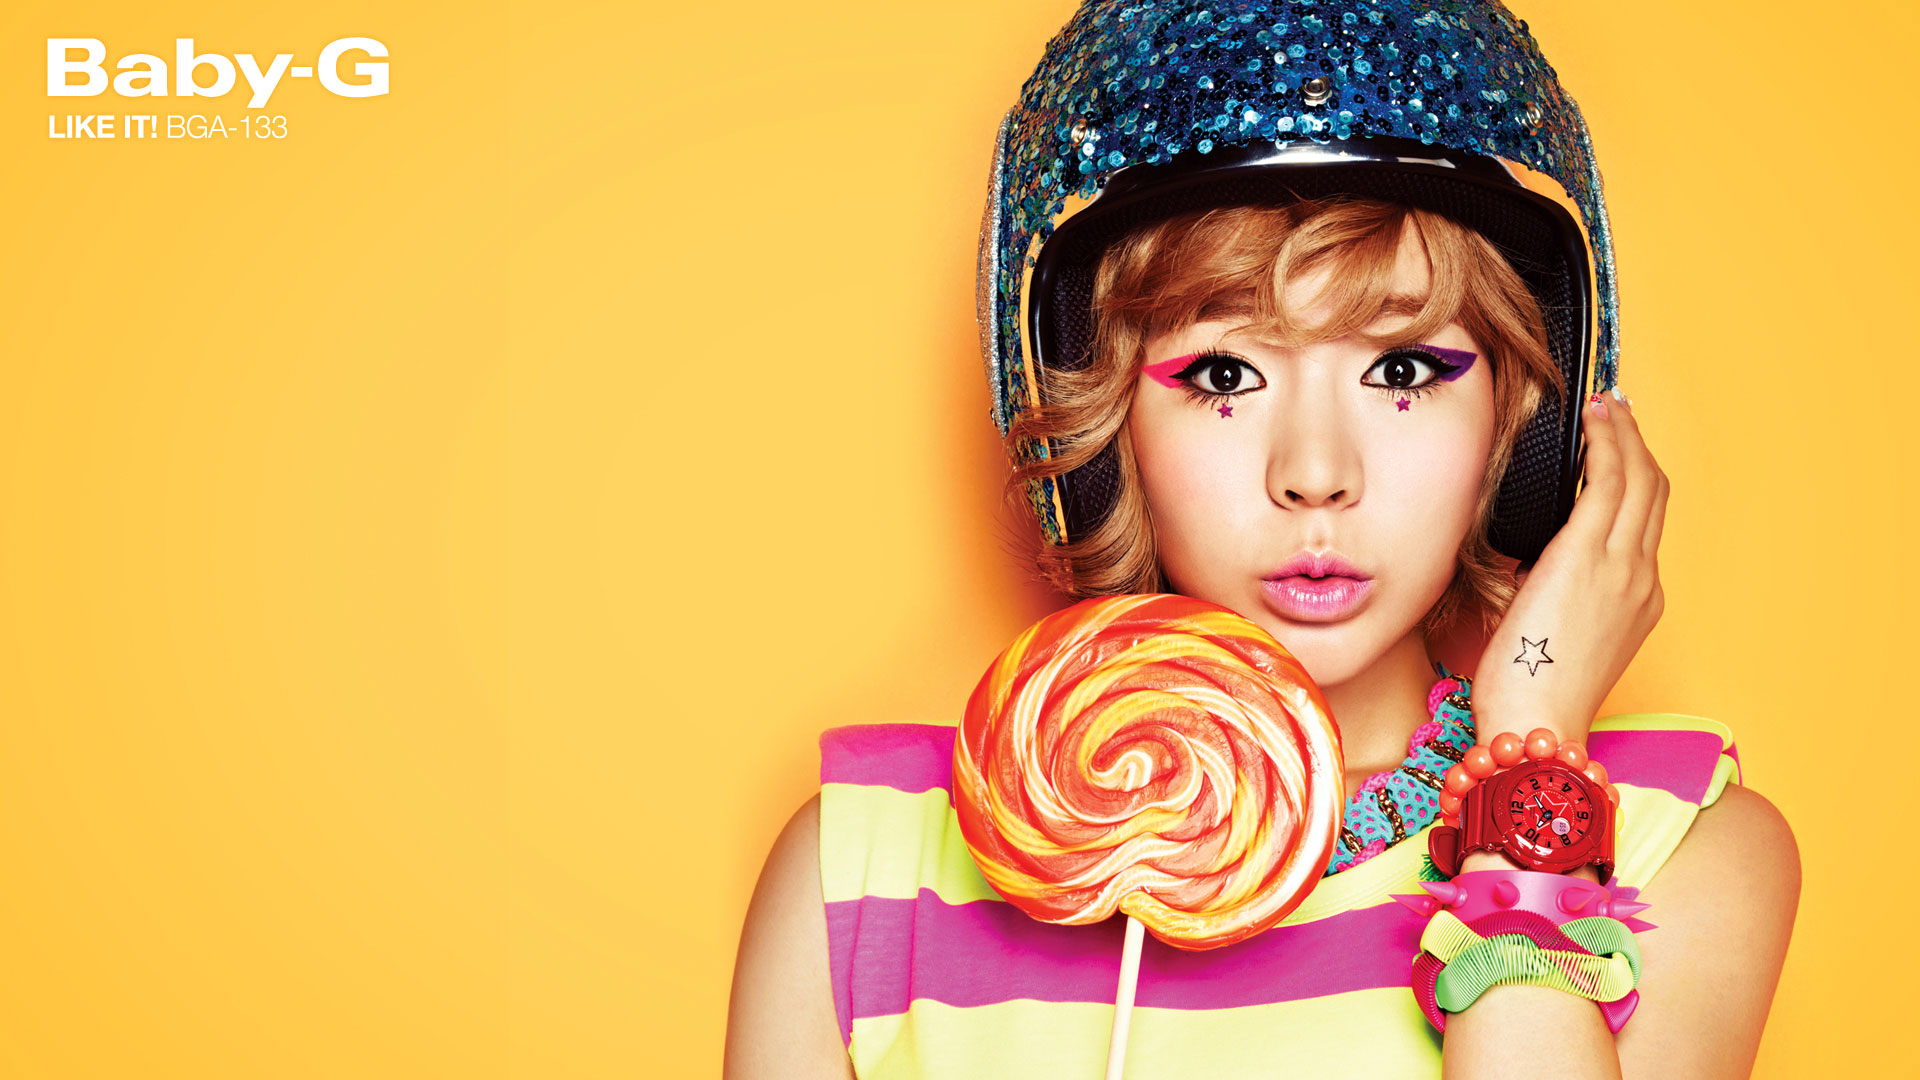 Casio Baby-G solo wallpapers